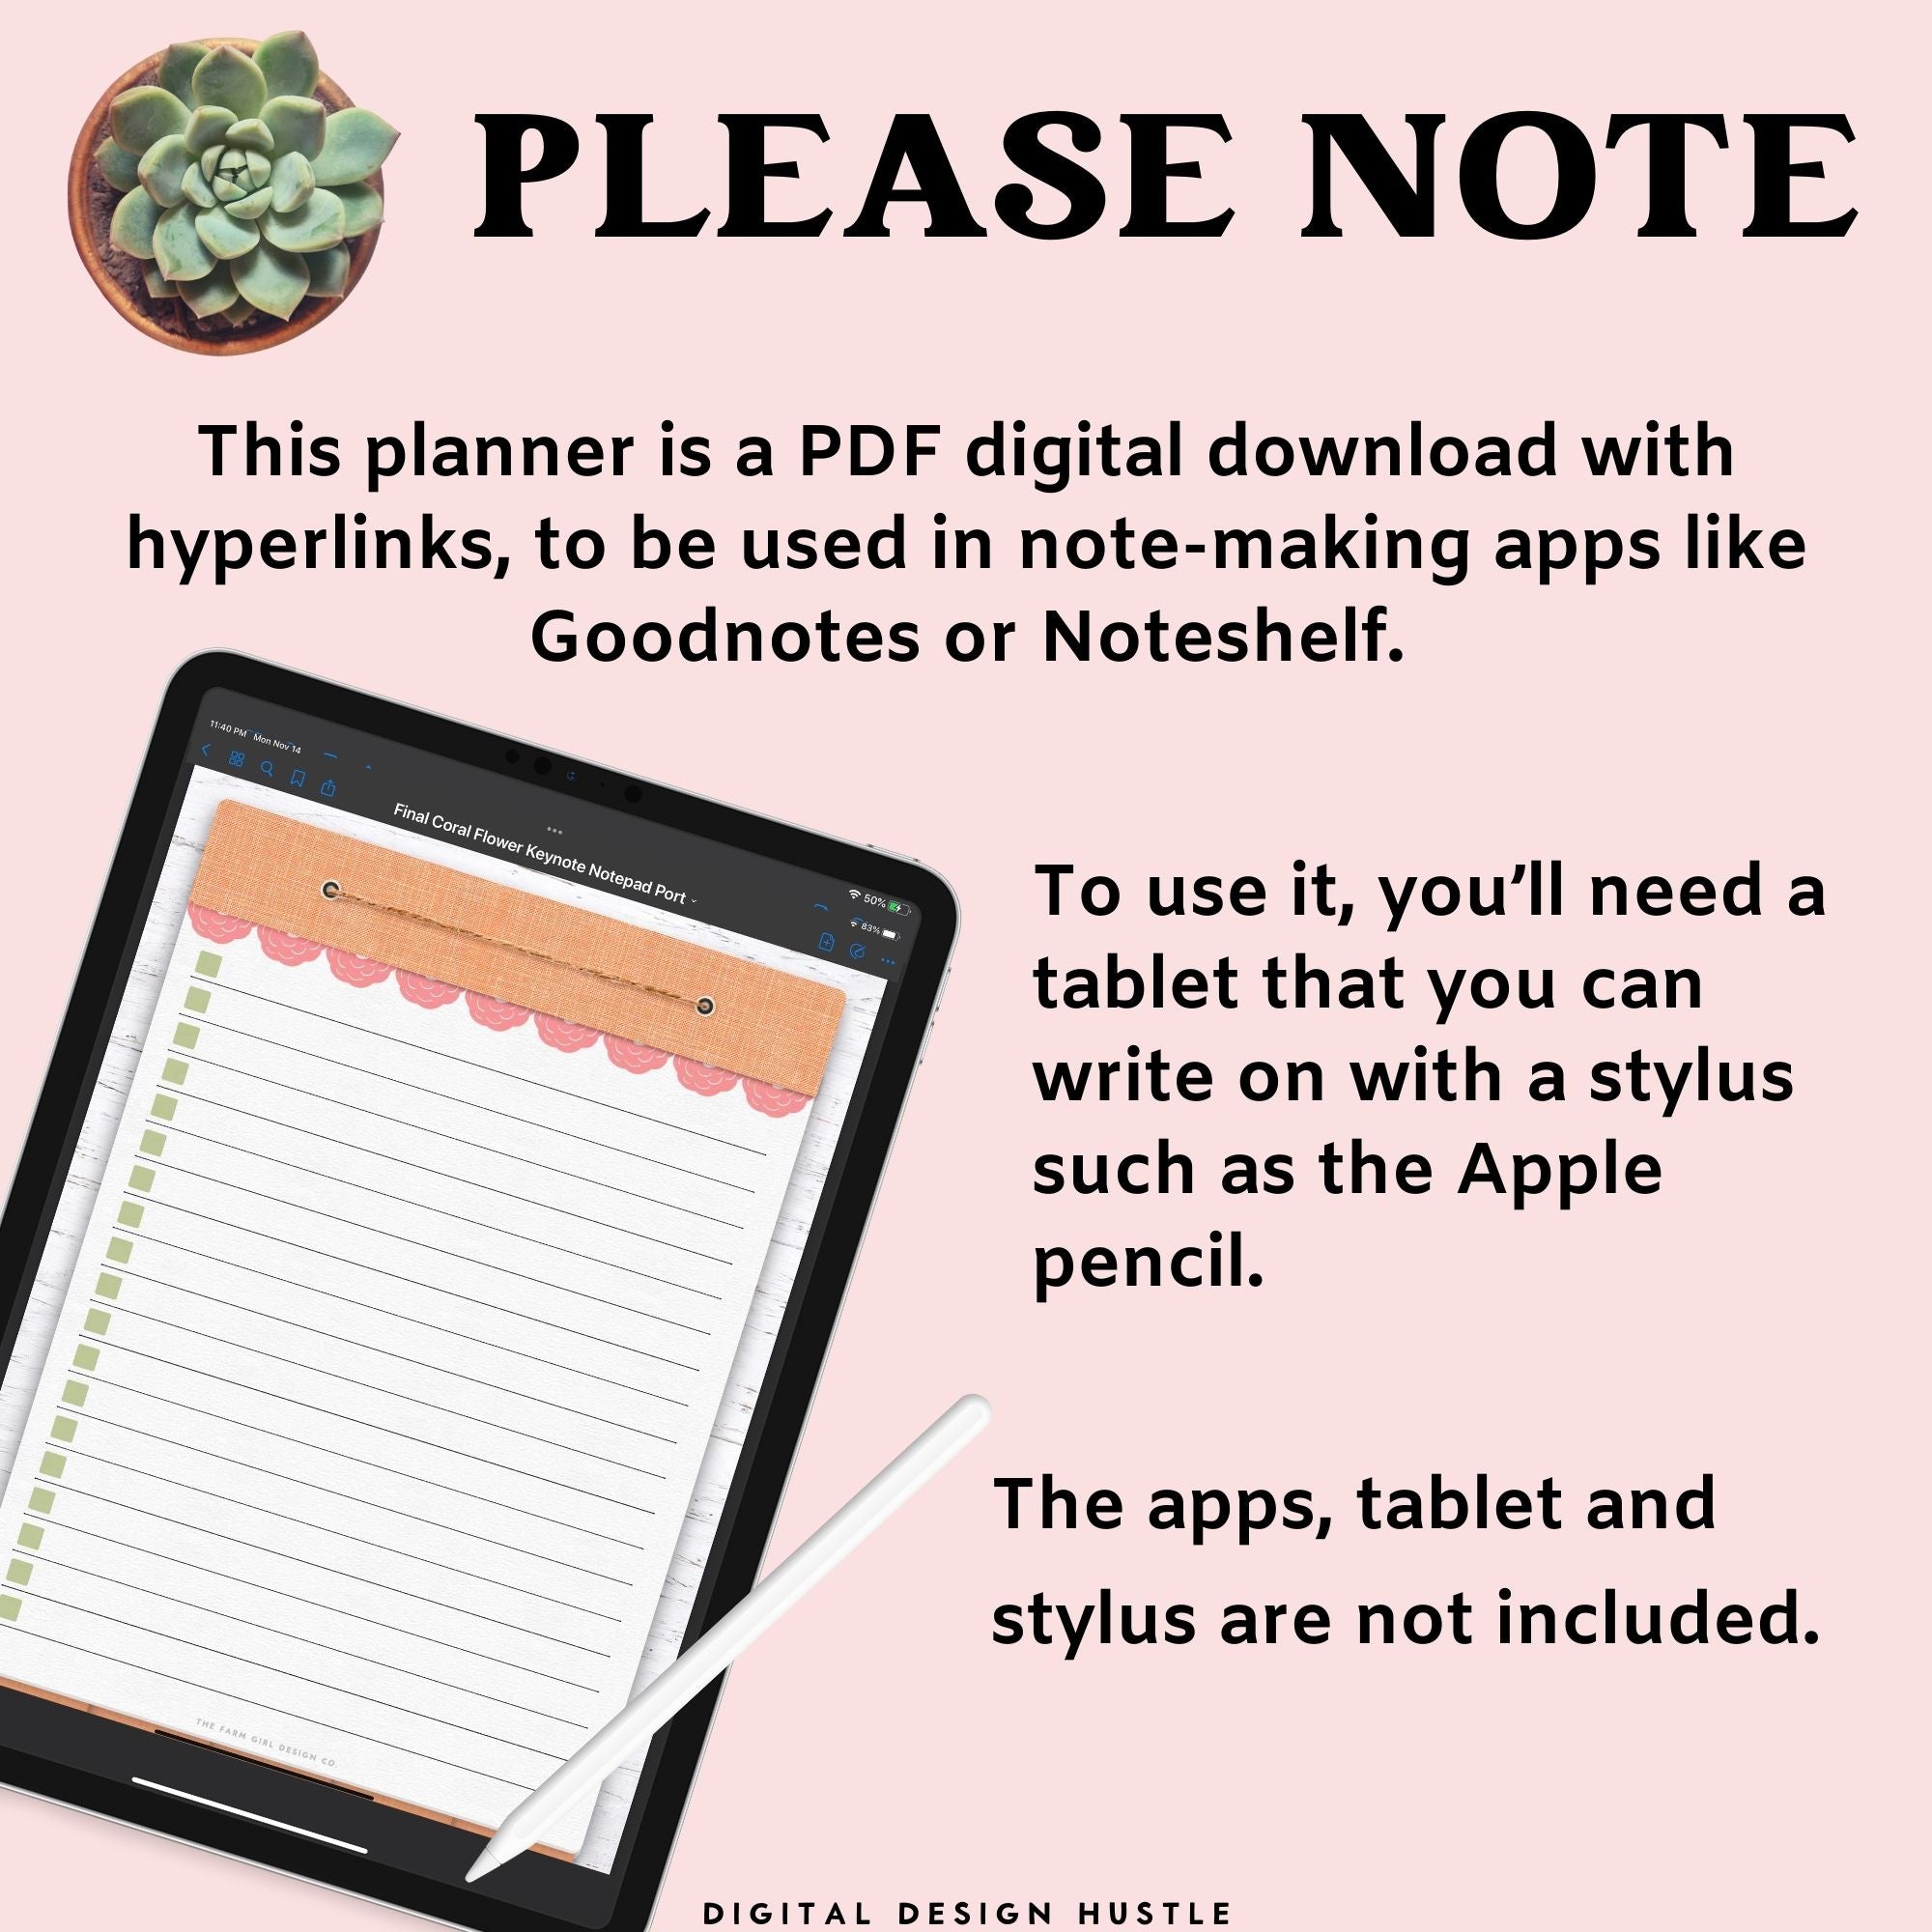 Digital Notebook With 5 Hyperlinked Sections